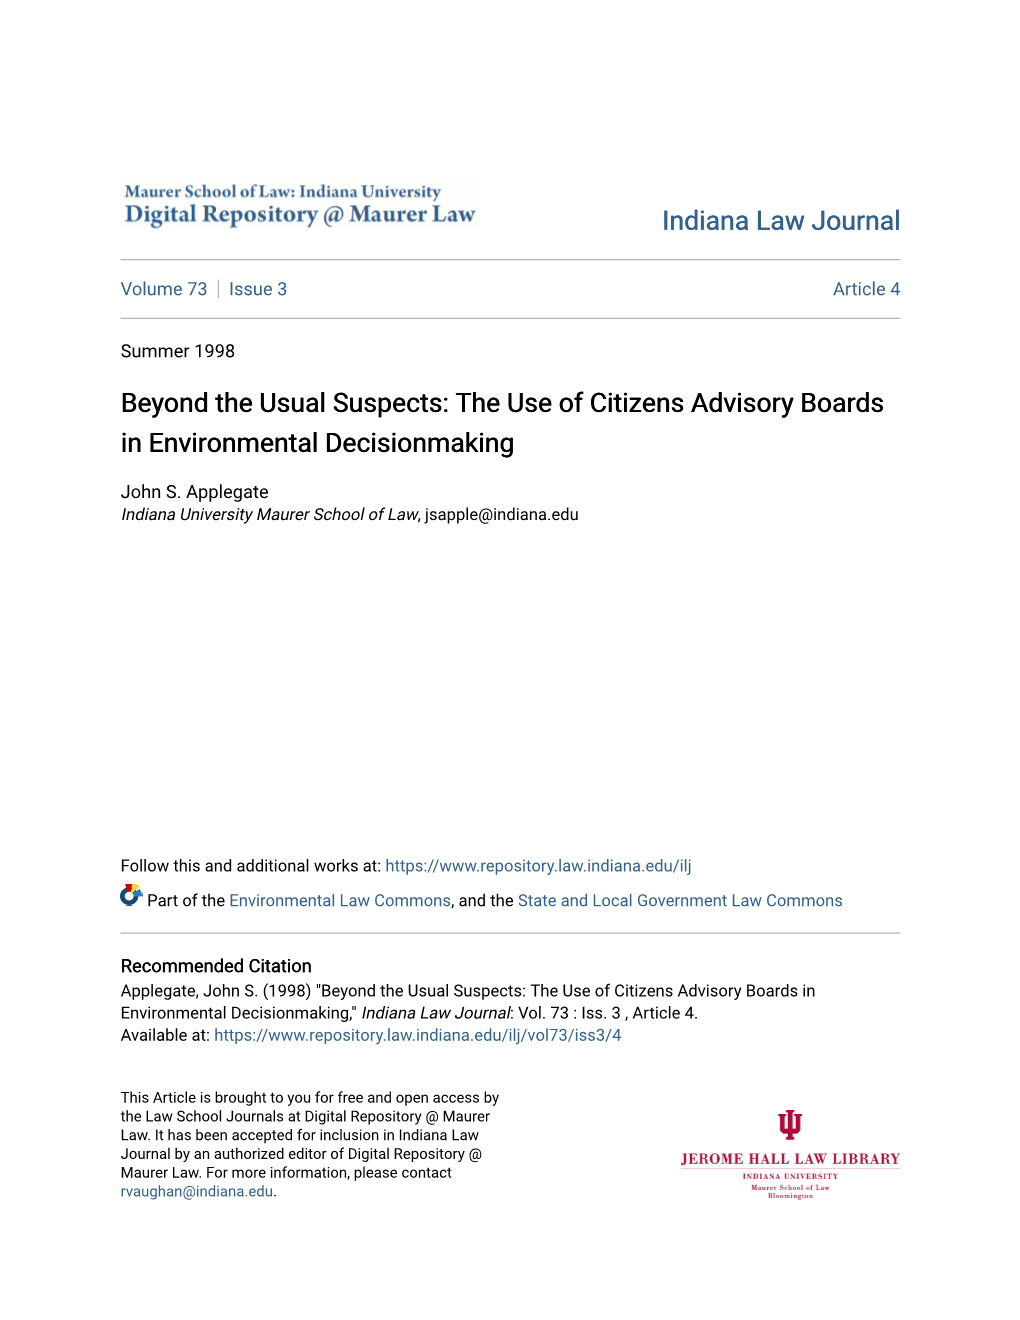 Beyond the Usual Suspects: the Use of Citizens Advisory Boards in Environmental Decisionmaking